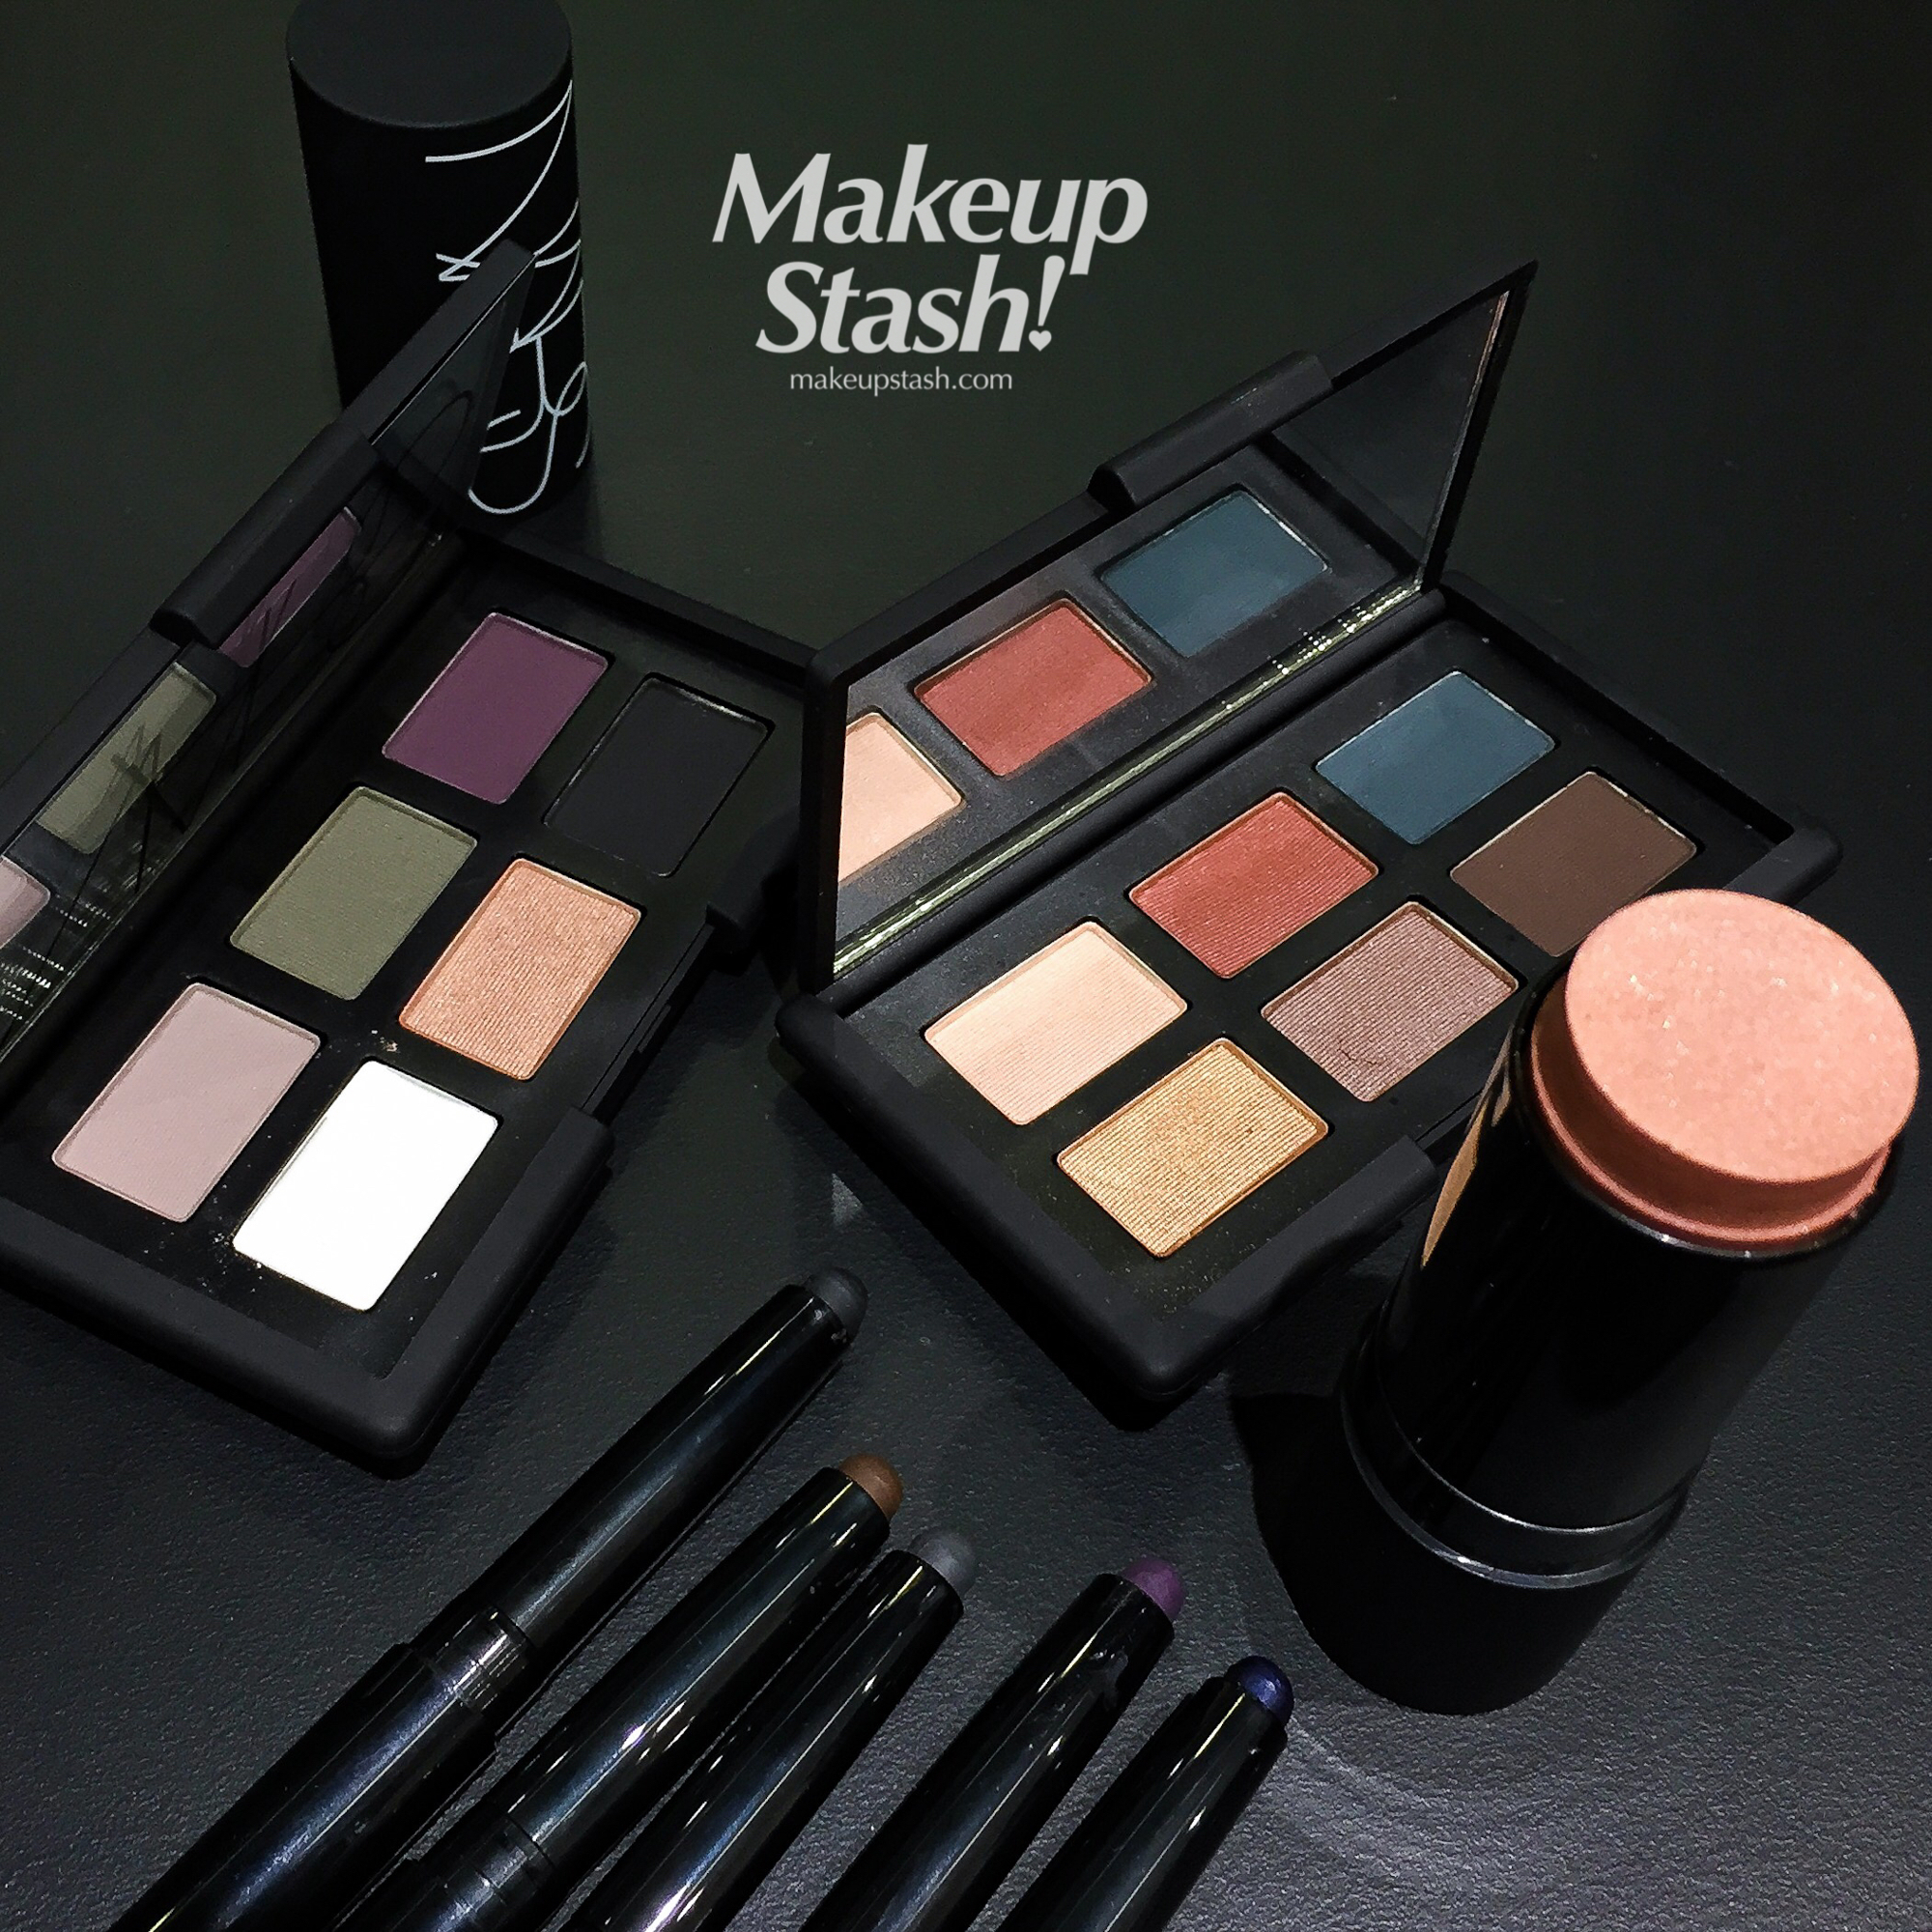 NARS Eye-Opening Act Collection for Spring 2015 (Photos & Swatches)